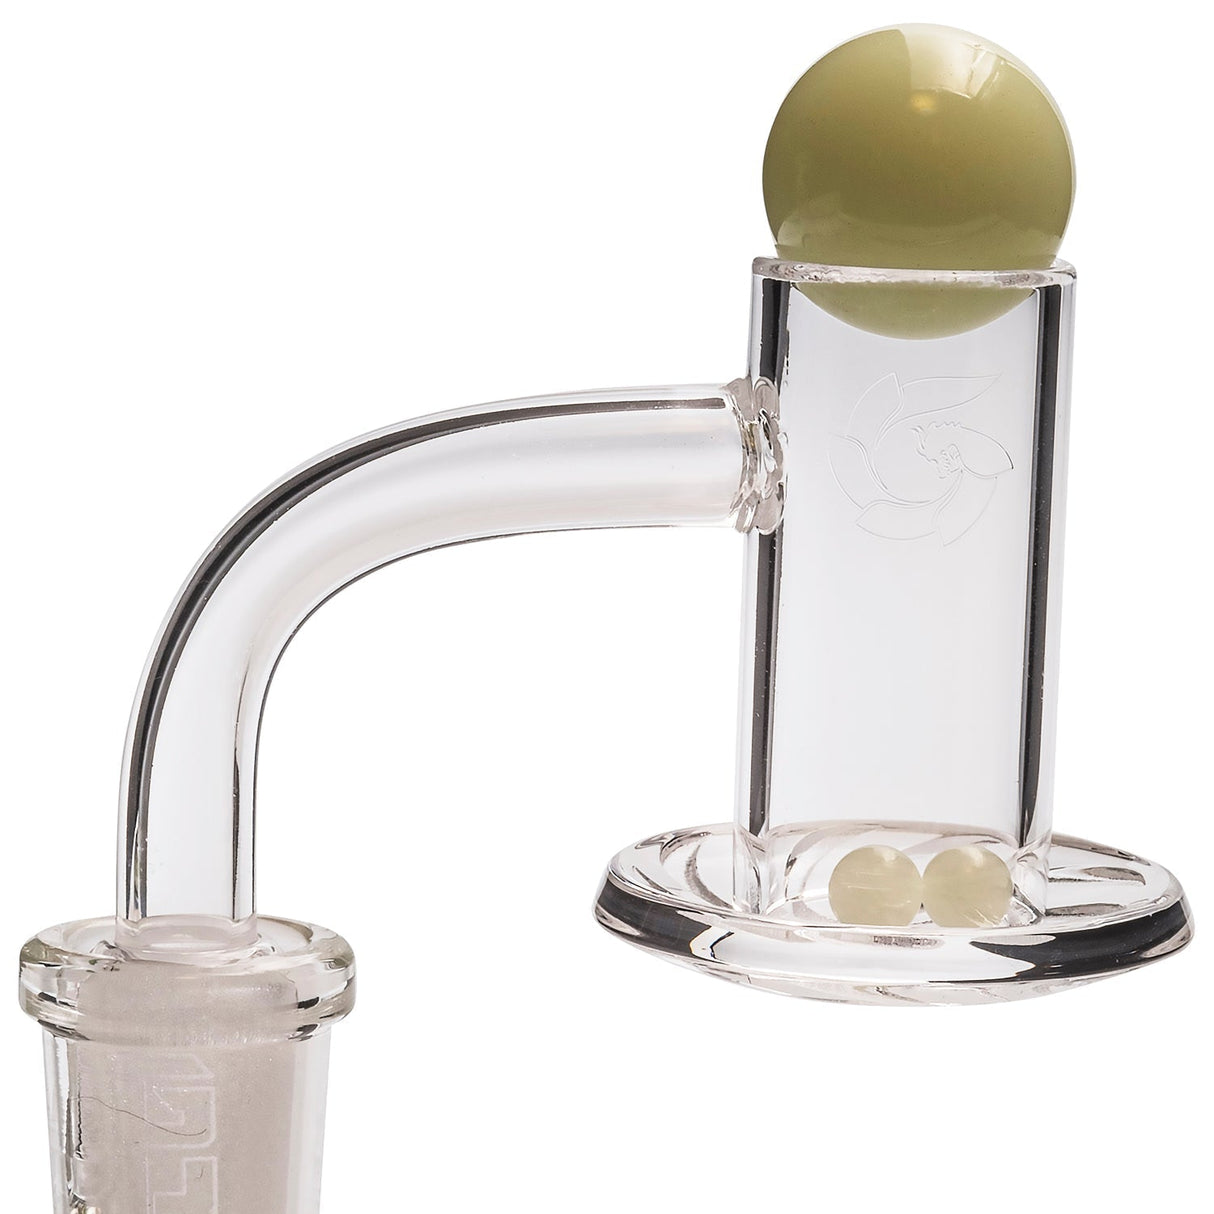 Glasshouse Hurricane Cyclone Quartz Banger Kit with Carb Cap, Male Joint, Side View